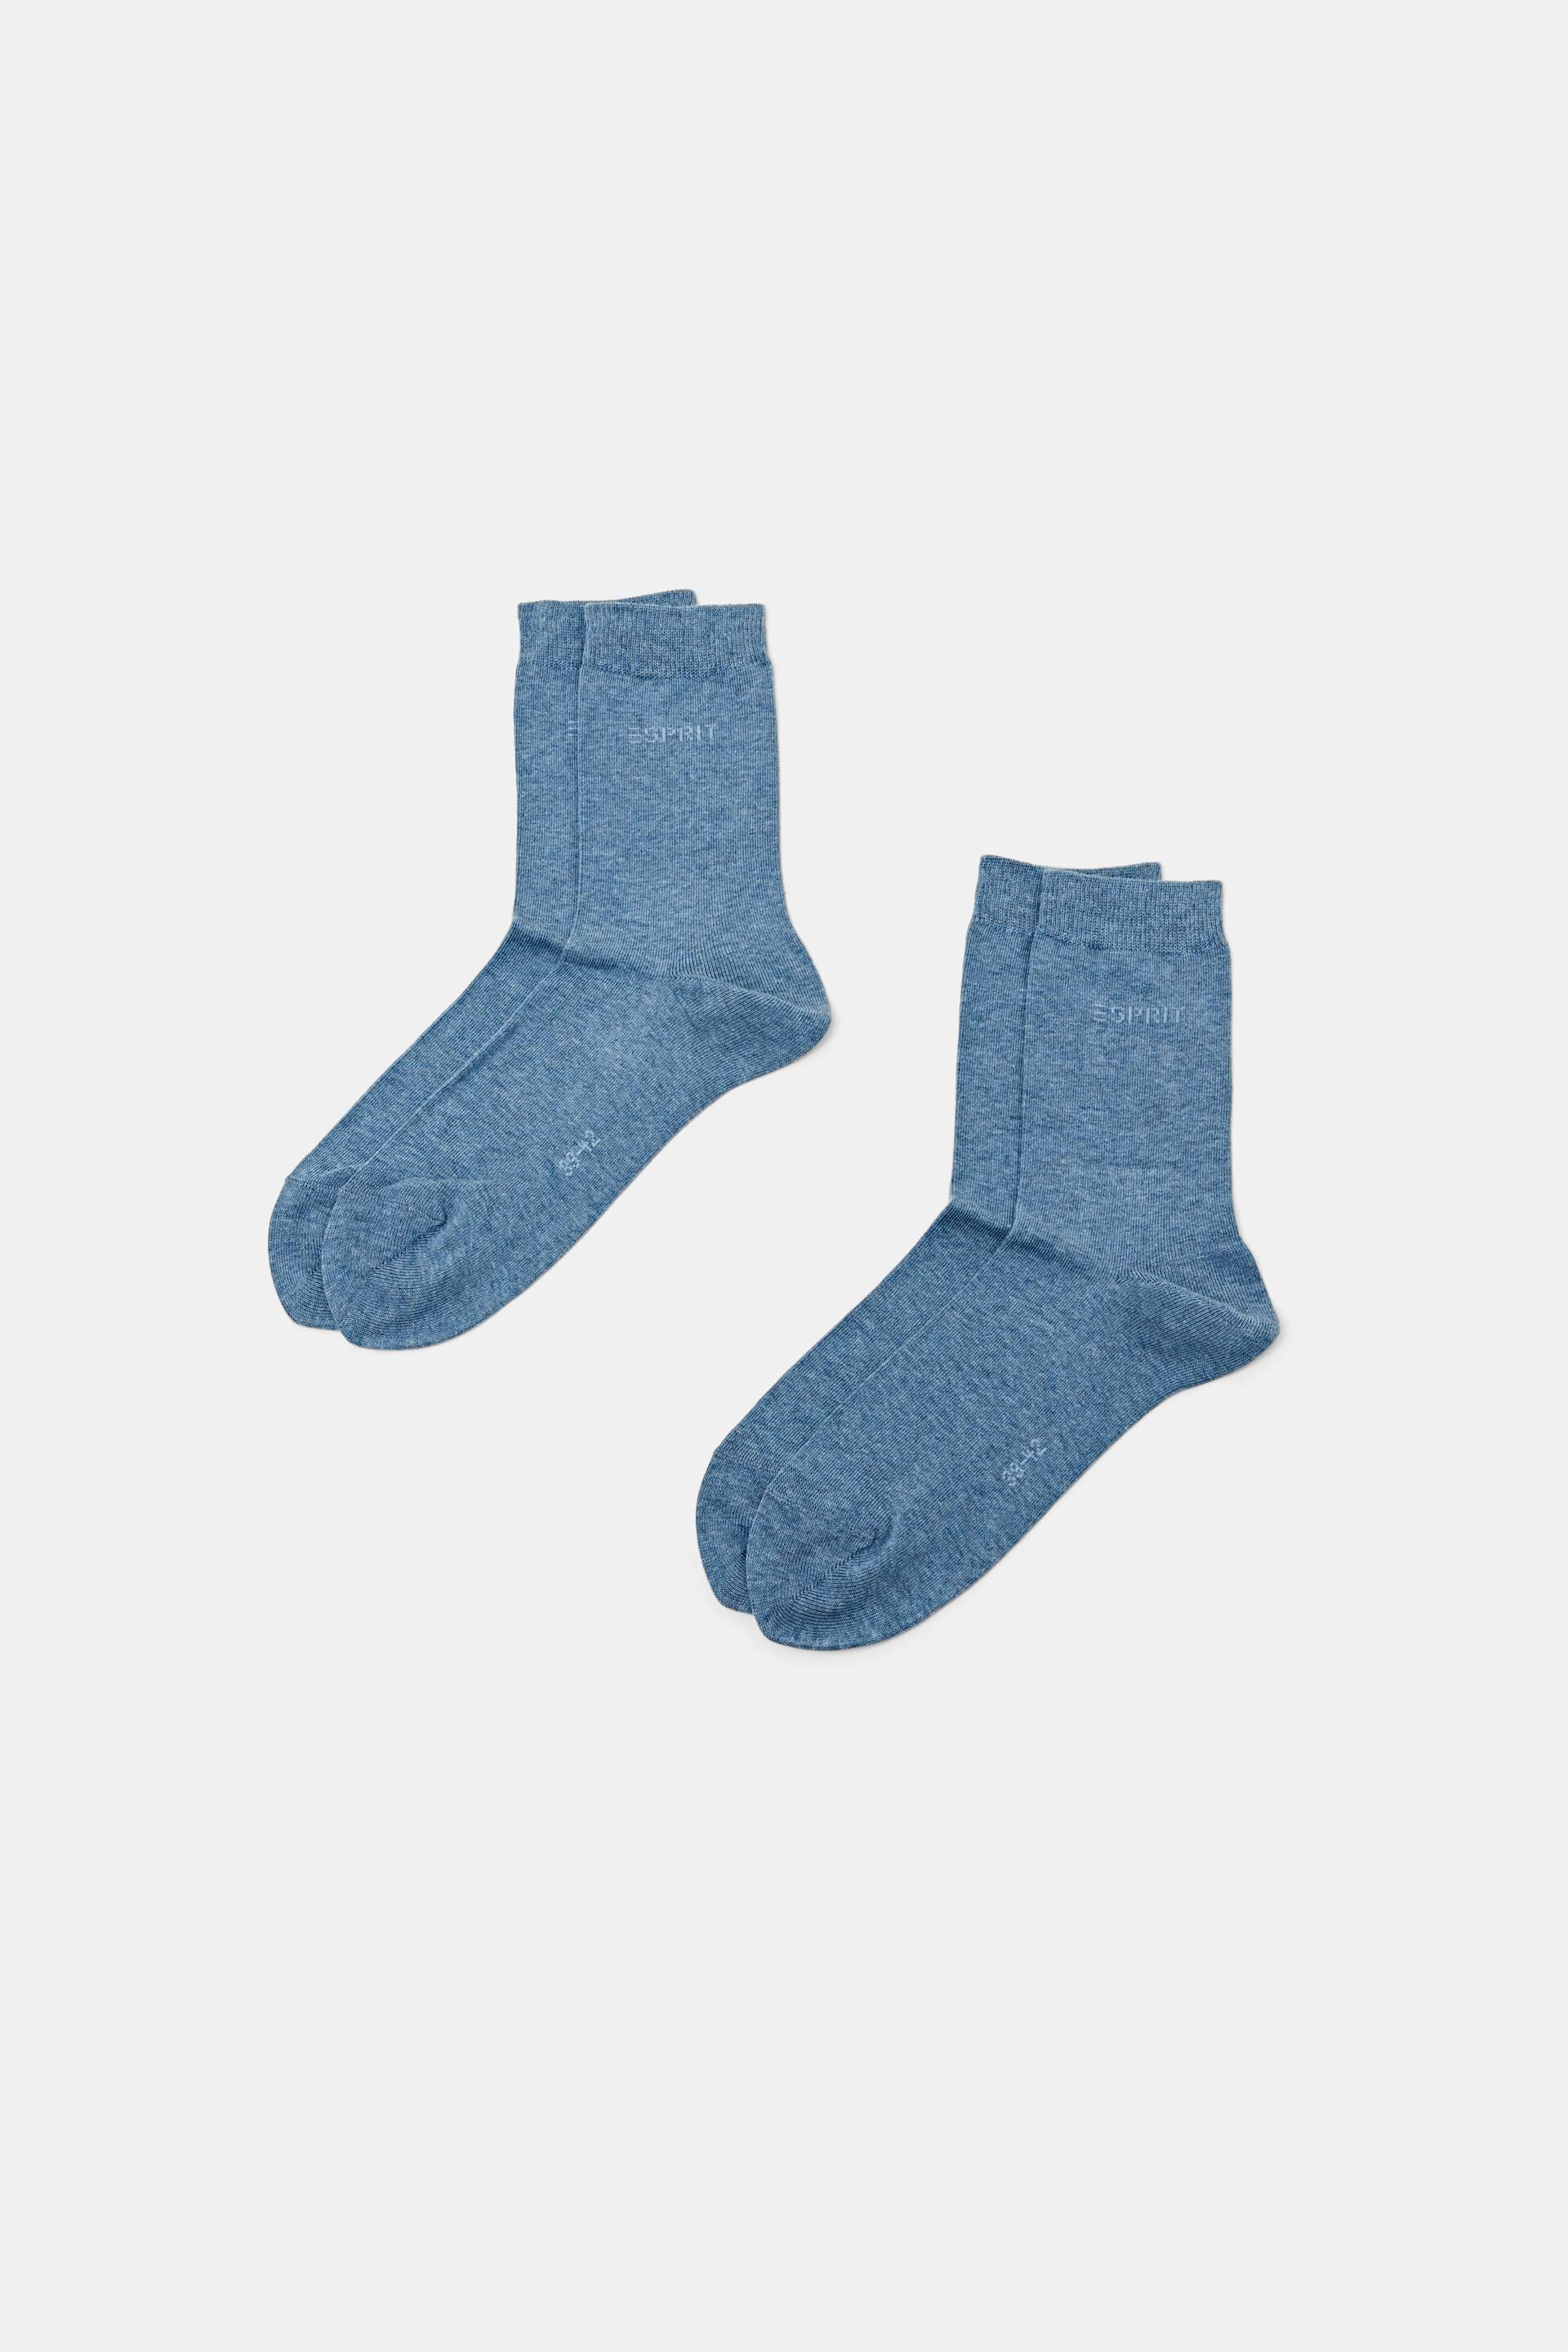 Esprit with knitted socks of 2-pack logo, cotton organic